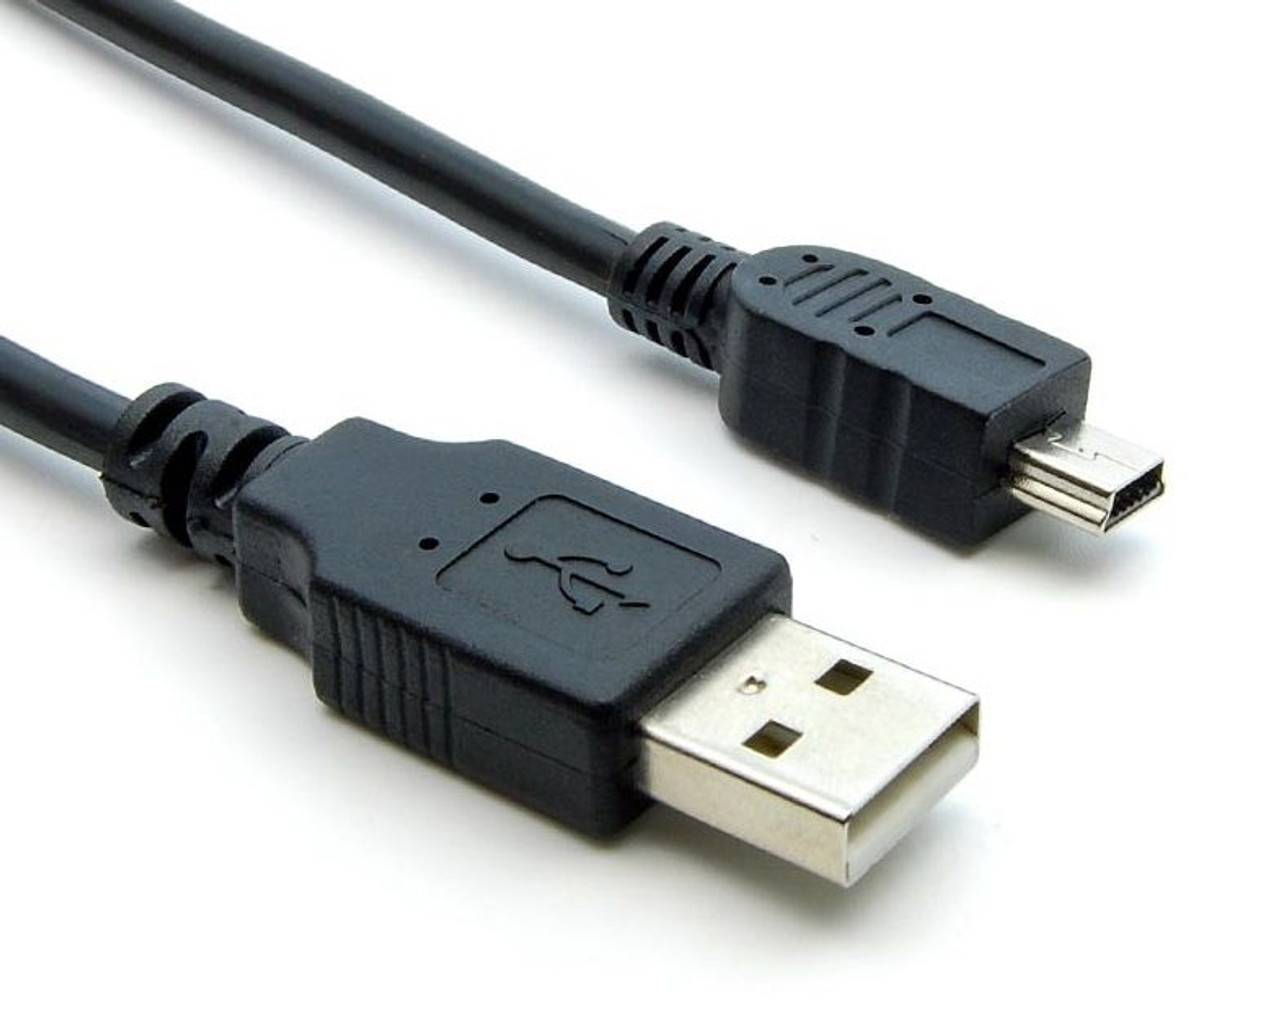 USB 2.0 Type-A to Type-B Cable, 6-Ft